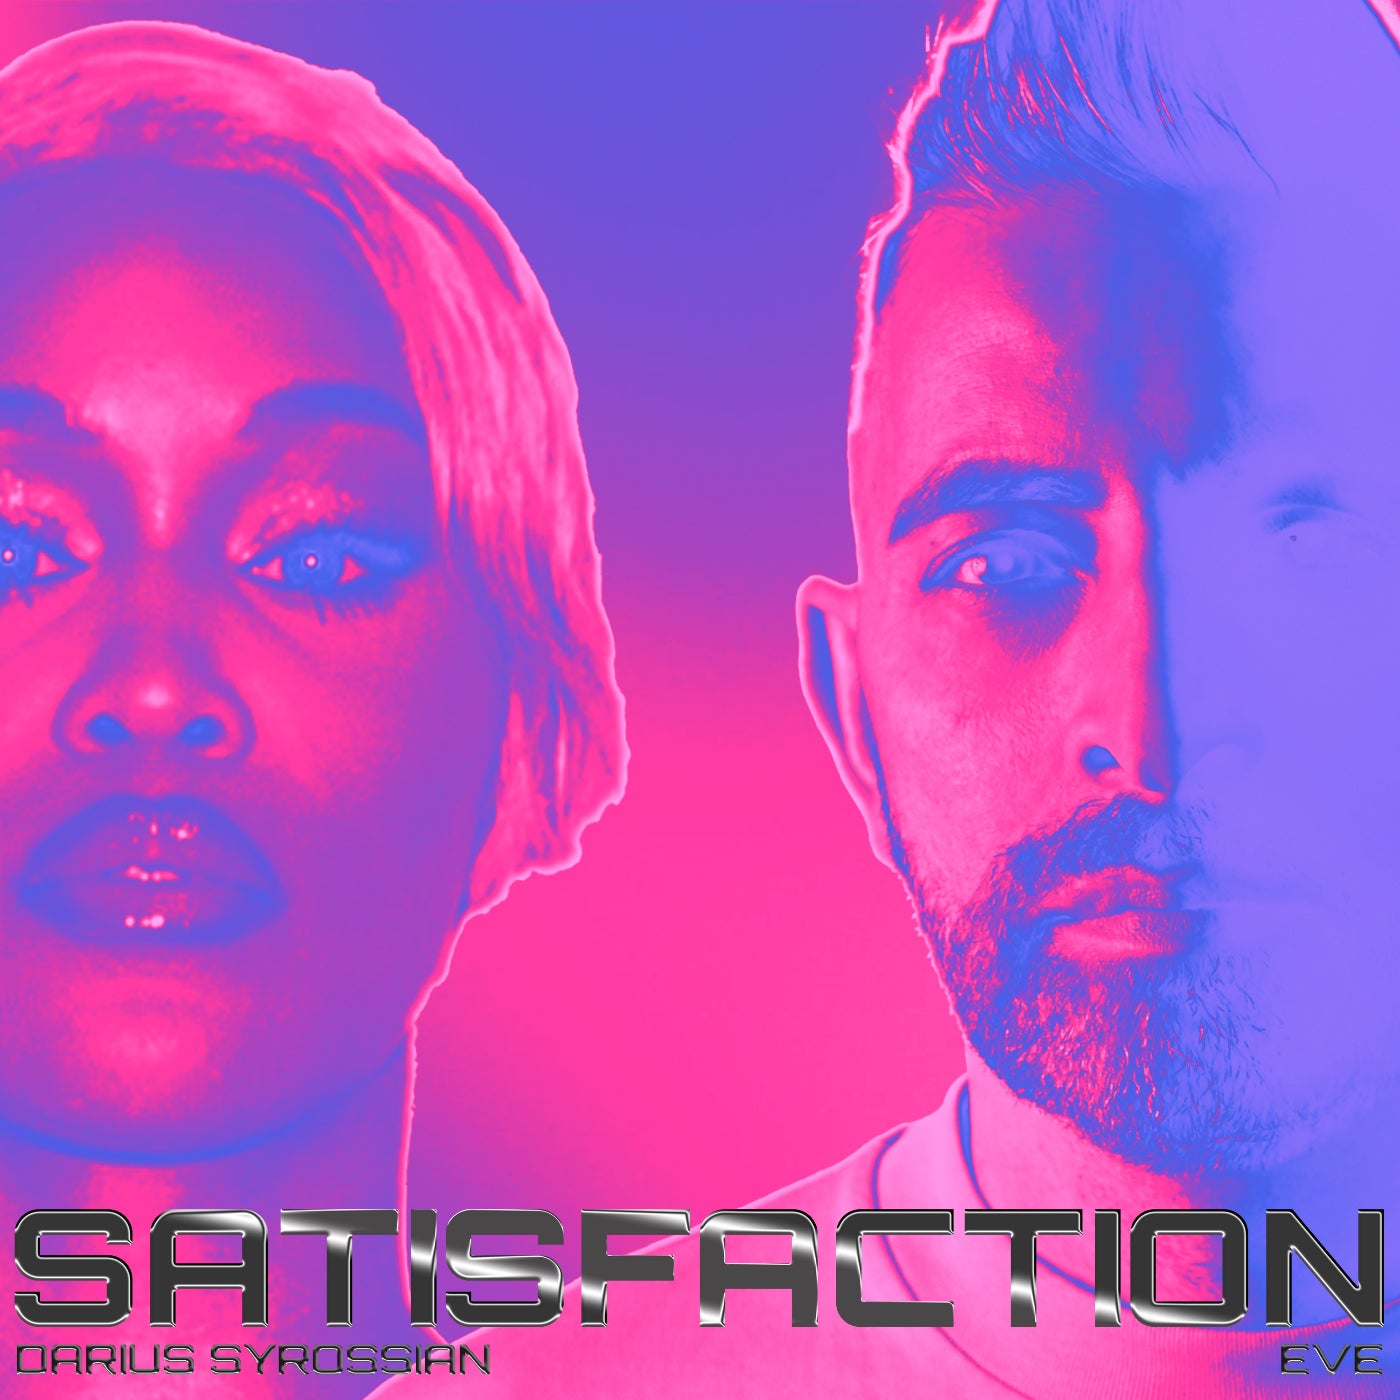 image cover: Darius Syrossian, Eve - Satisfaction (Extended) on Ministry of Sound Recordings